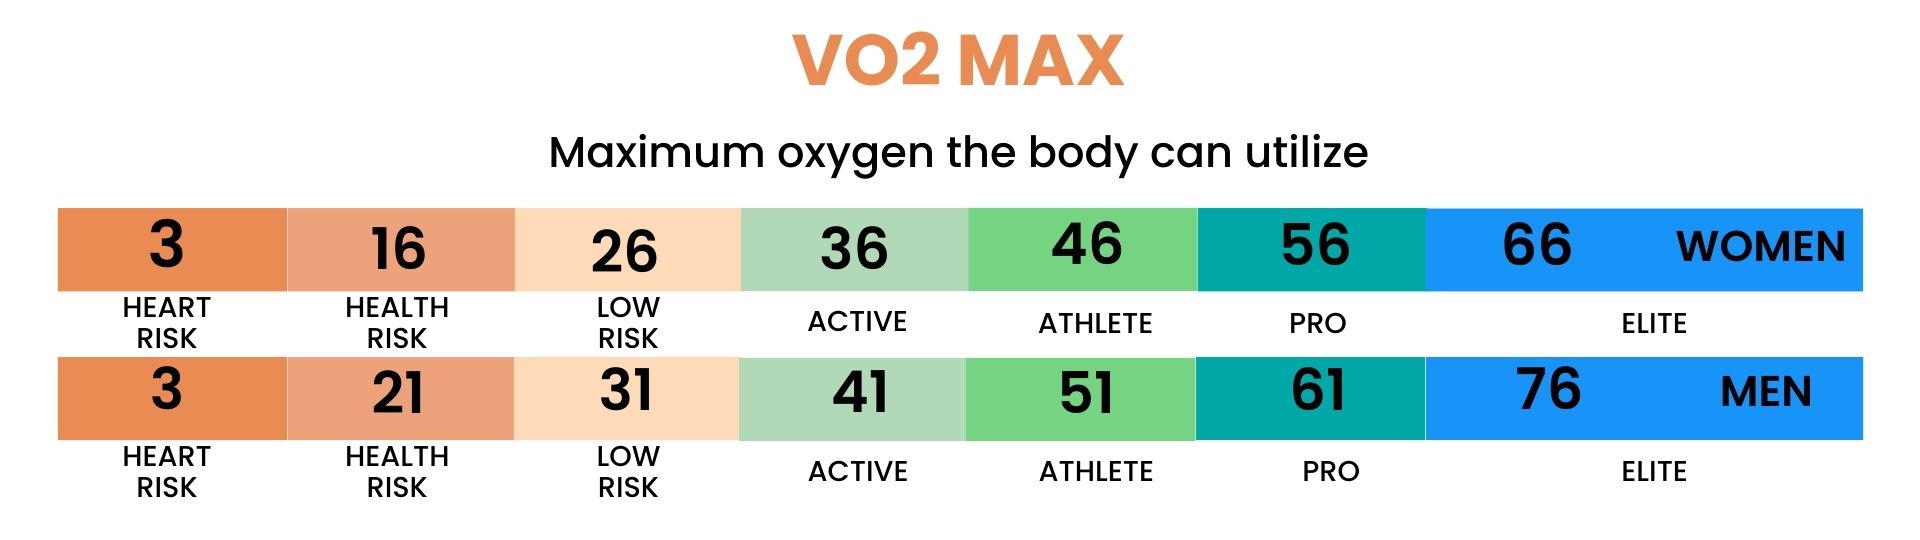 A VO2 Max chart showing oxygen levels from "heart risk" to "elite." VO2 Max refers to the maximum oxygen the body can utilize. It is also known as "maximal oxygen consumption," "peak oxygen intake," and "maximal oxygen uptake."